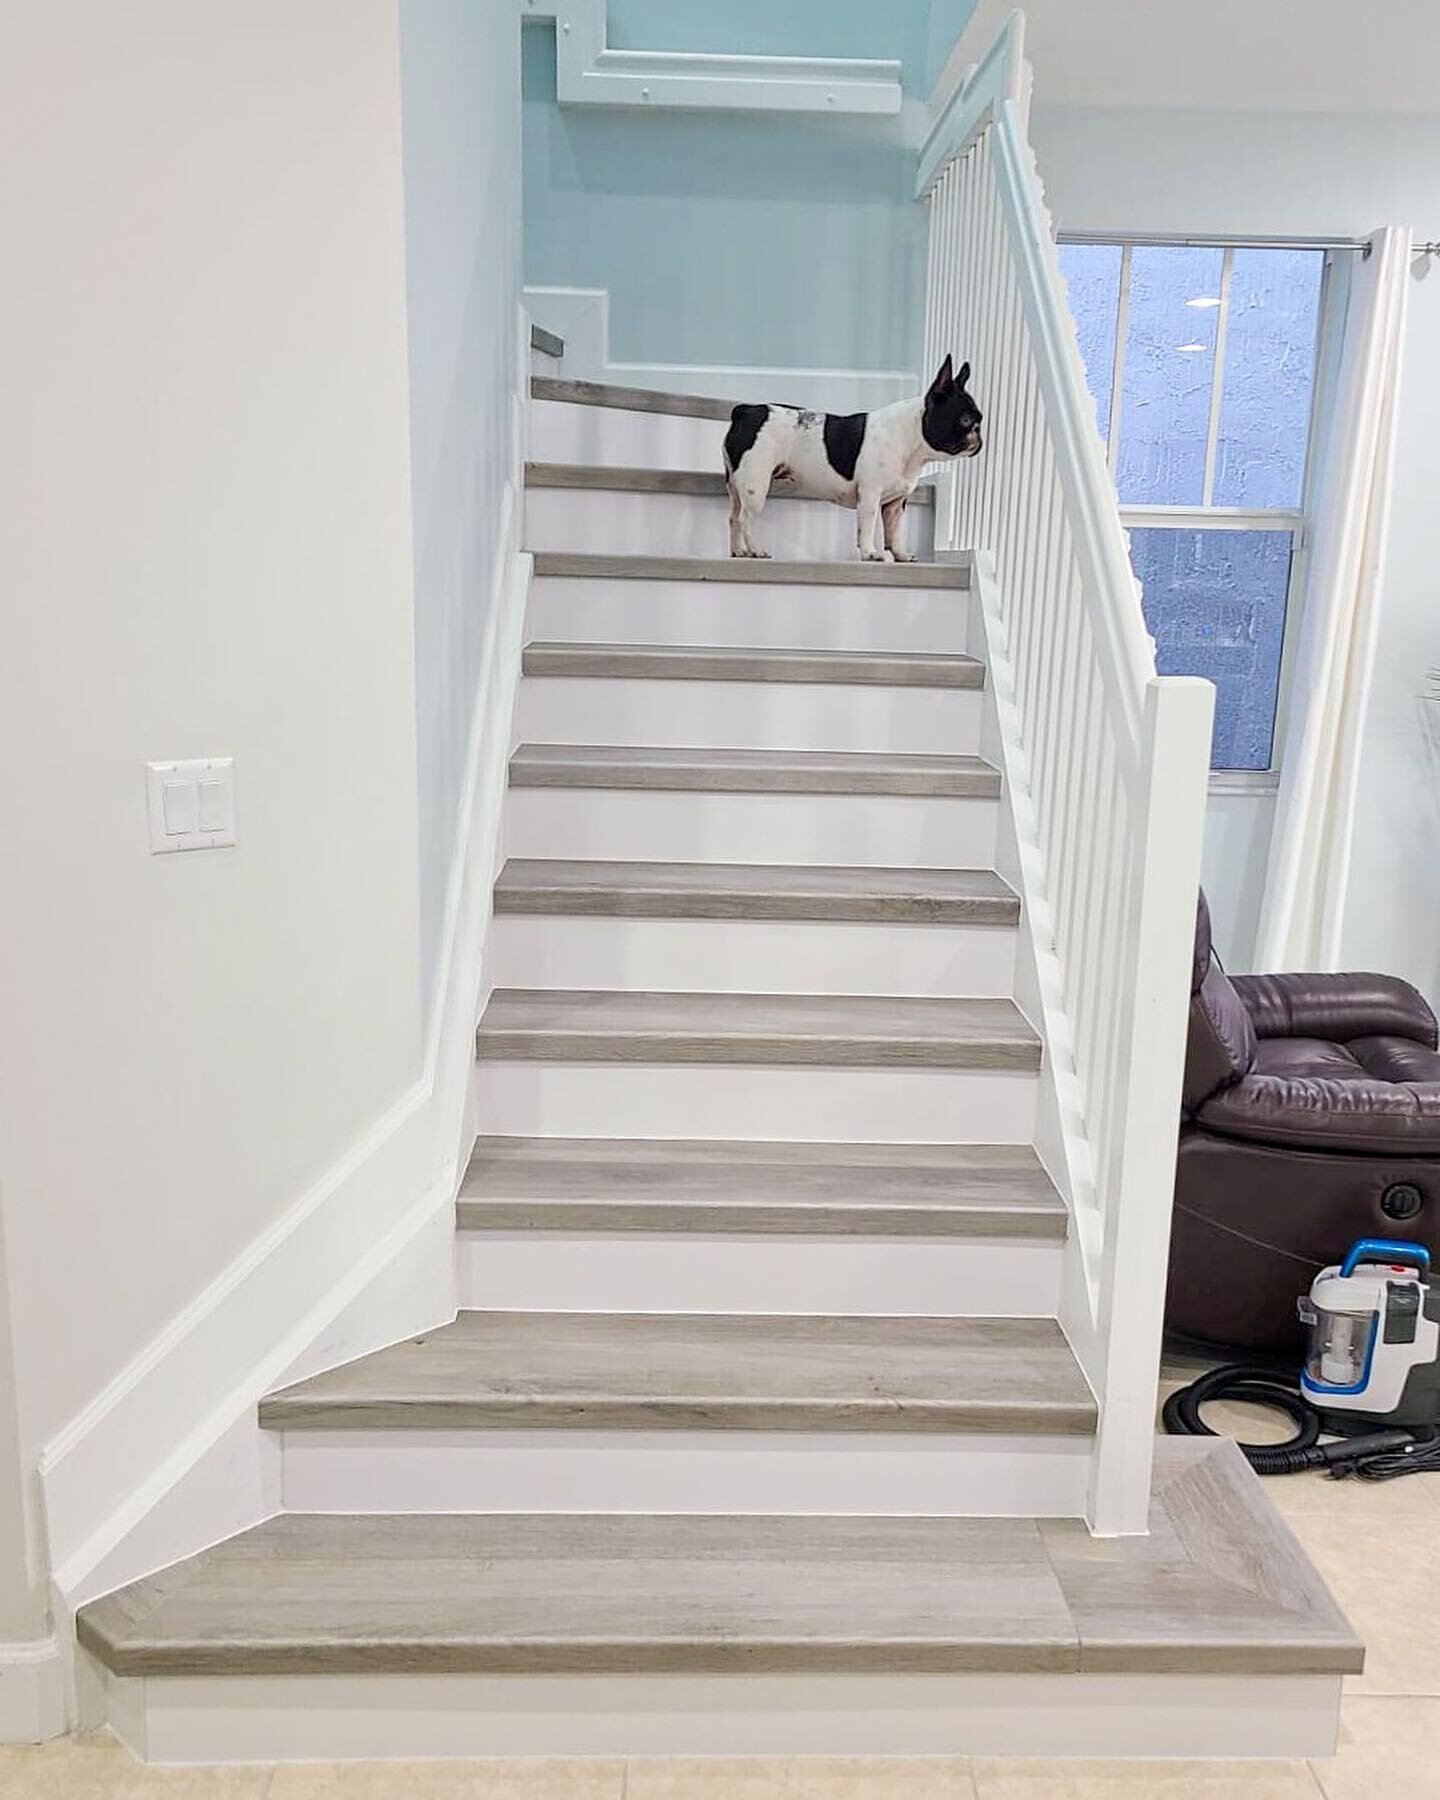 We've got stairs for those you love most 🐶 🐈 🐕⁠⁠
⁠⁠
Our vinyl stairs are pet friendly. ⁠⁠
⁠⁠
Click link in bio for more info or DM us today for a quote!⁠⁠
⁠⁠
⁠⁠
⁠⁠
⁠⁠
⁠⁠
⁠⁠
⁠⁠
#interior #interiordesign #home #homedecor #decor #instahome #petfriend